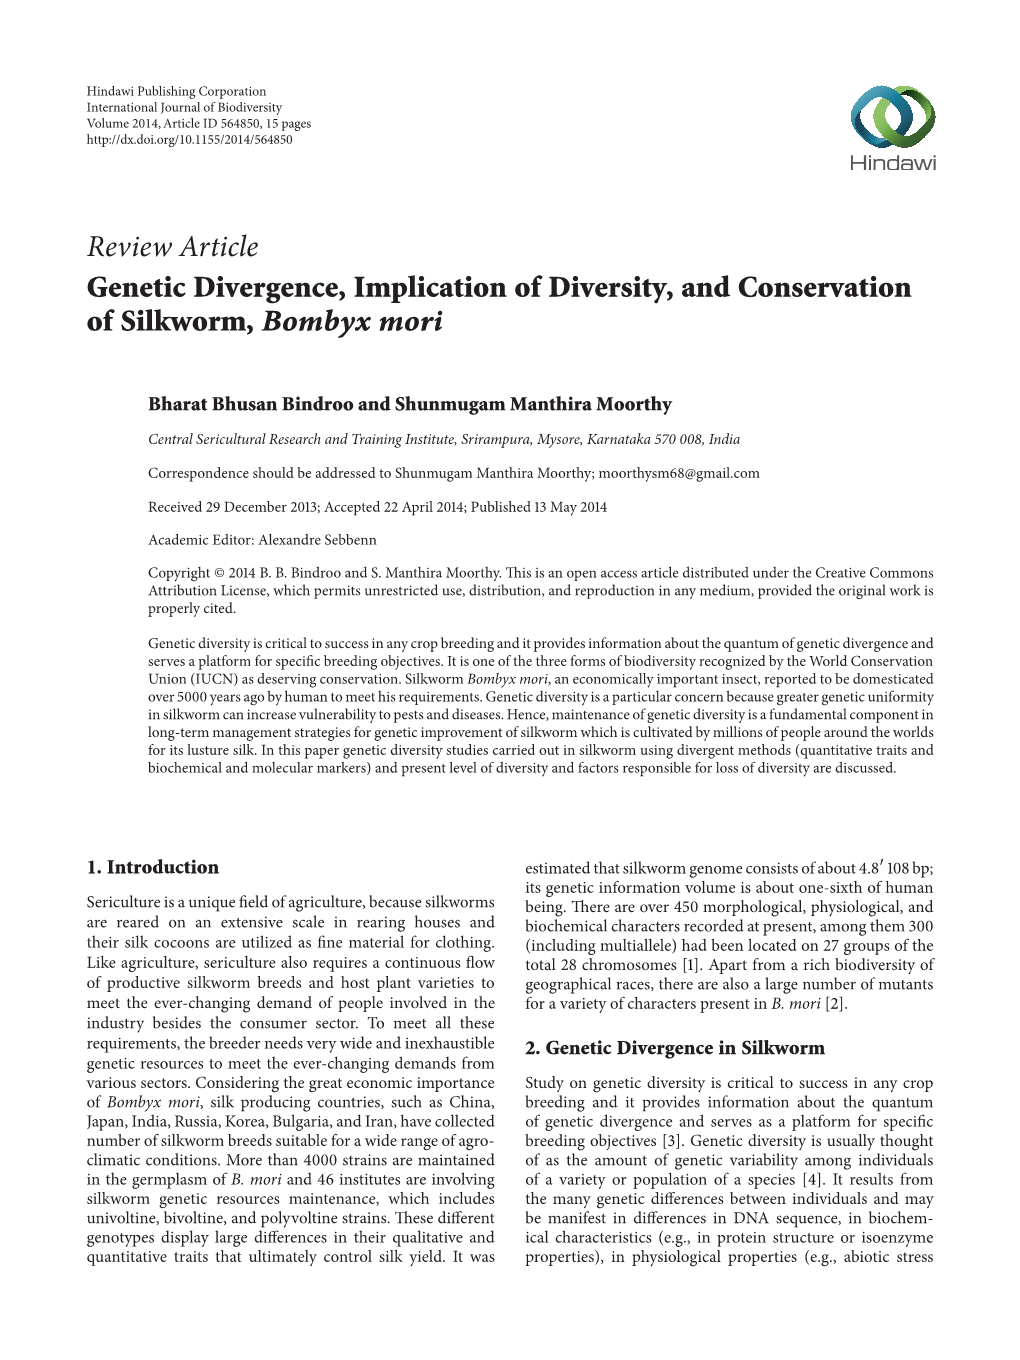 Genetic Divergence, Implication of Diversity, and Conservation of Silkworm, Bombyx Mori